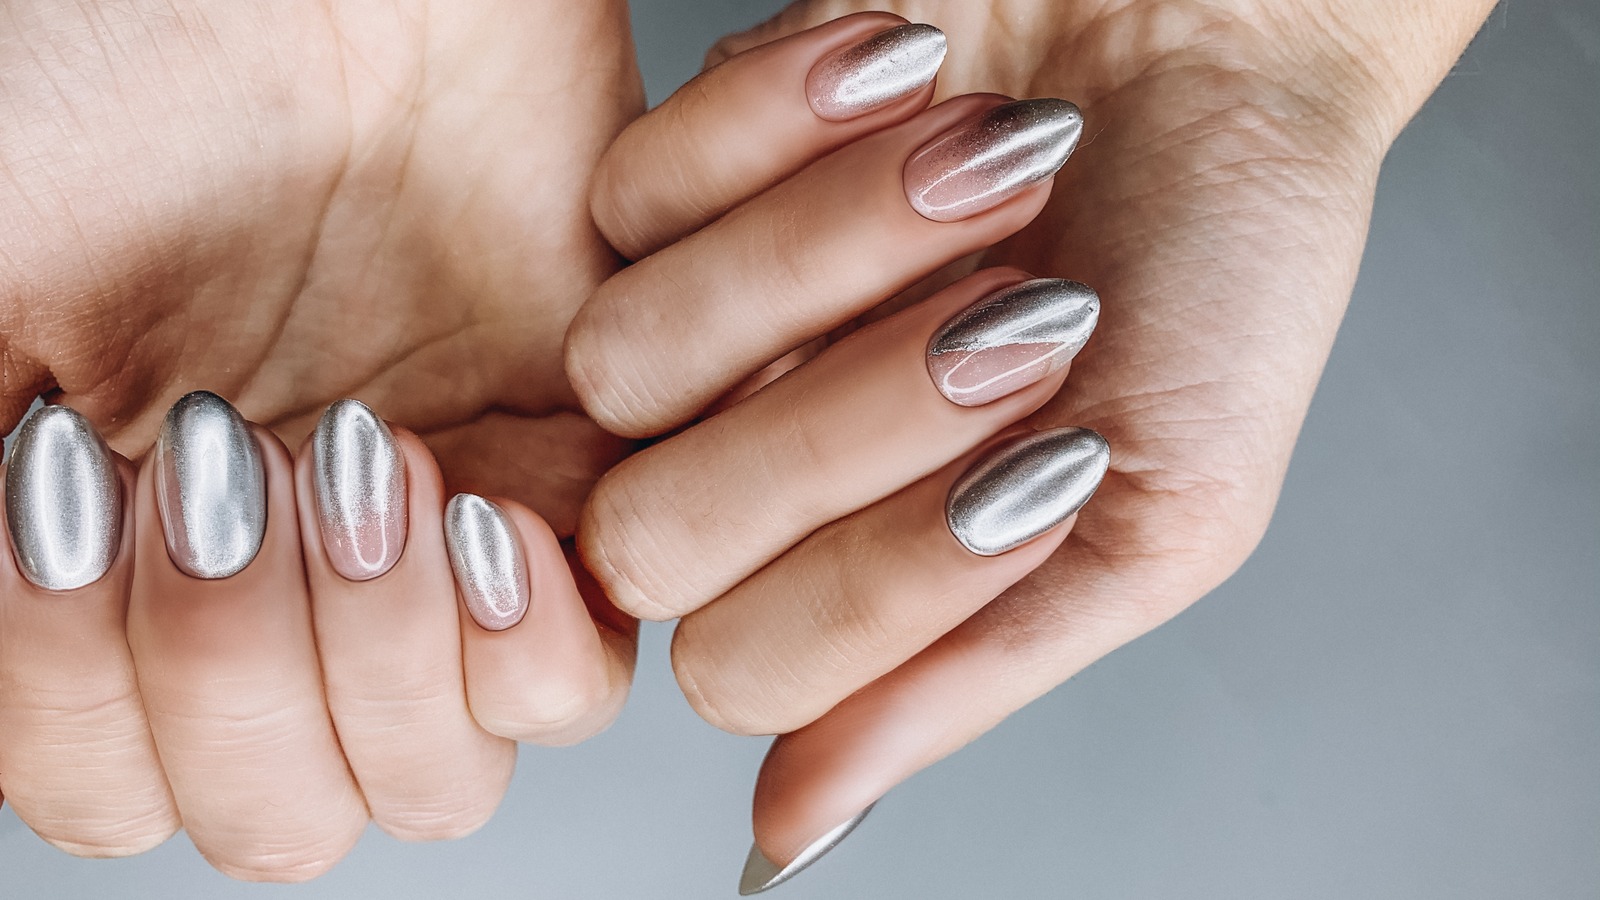 Want a different nail shape? You don't have to start over— just reshape!  For my tips on how to easily go from a Square nail shape to more… |  Instagram